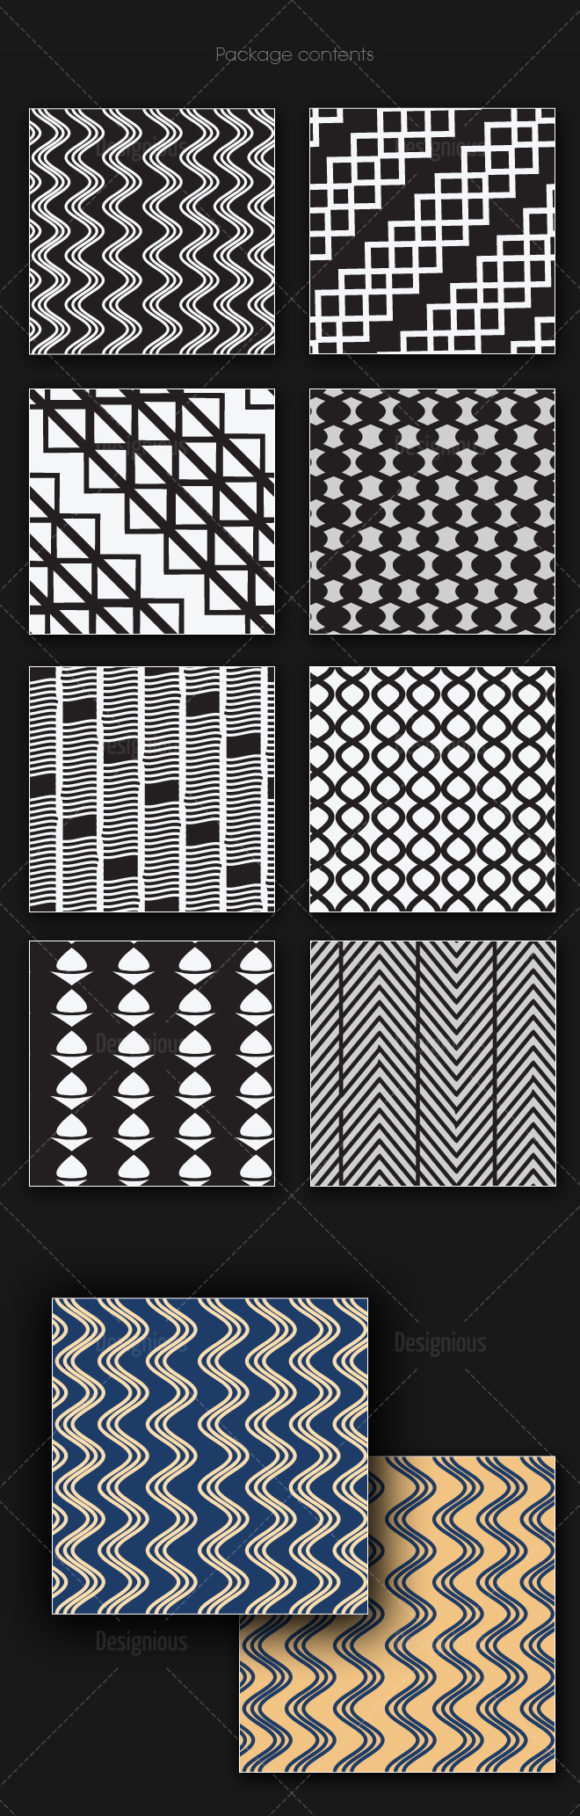 Seamless Patterns Vector Pack 158 2